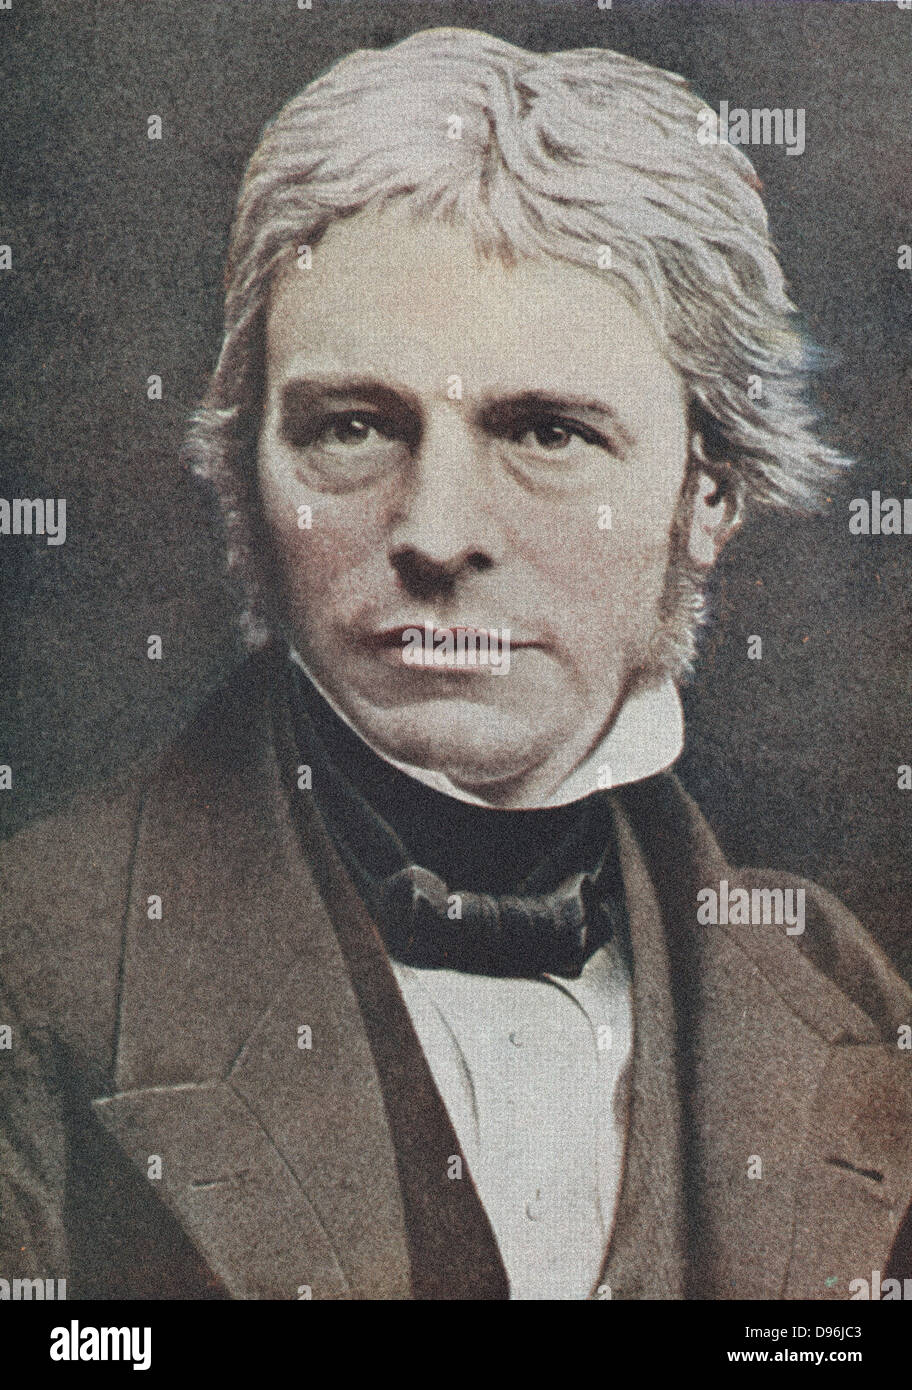 Michael Faraday (1791-1867) British physicist and chemist. From a hand-tinted photograph. Stock Photo